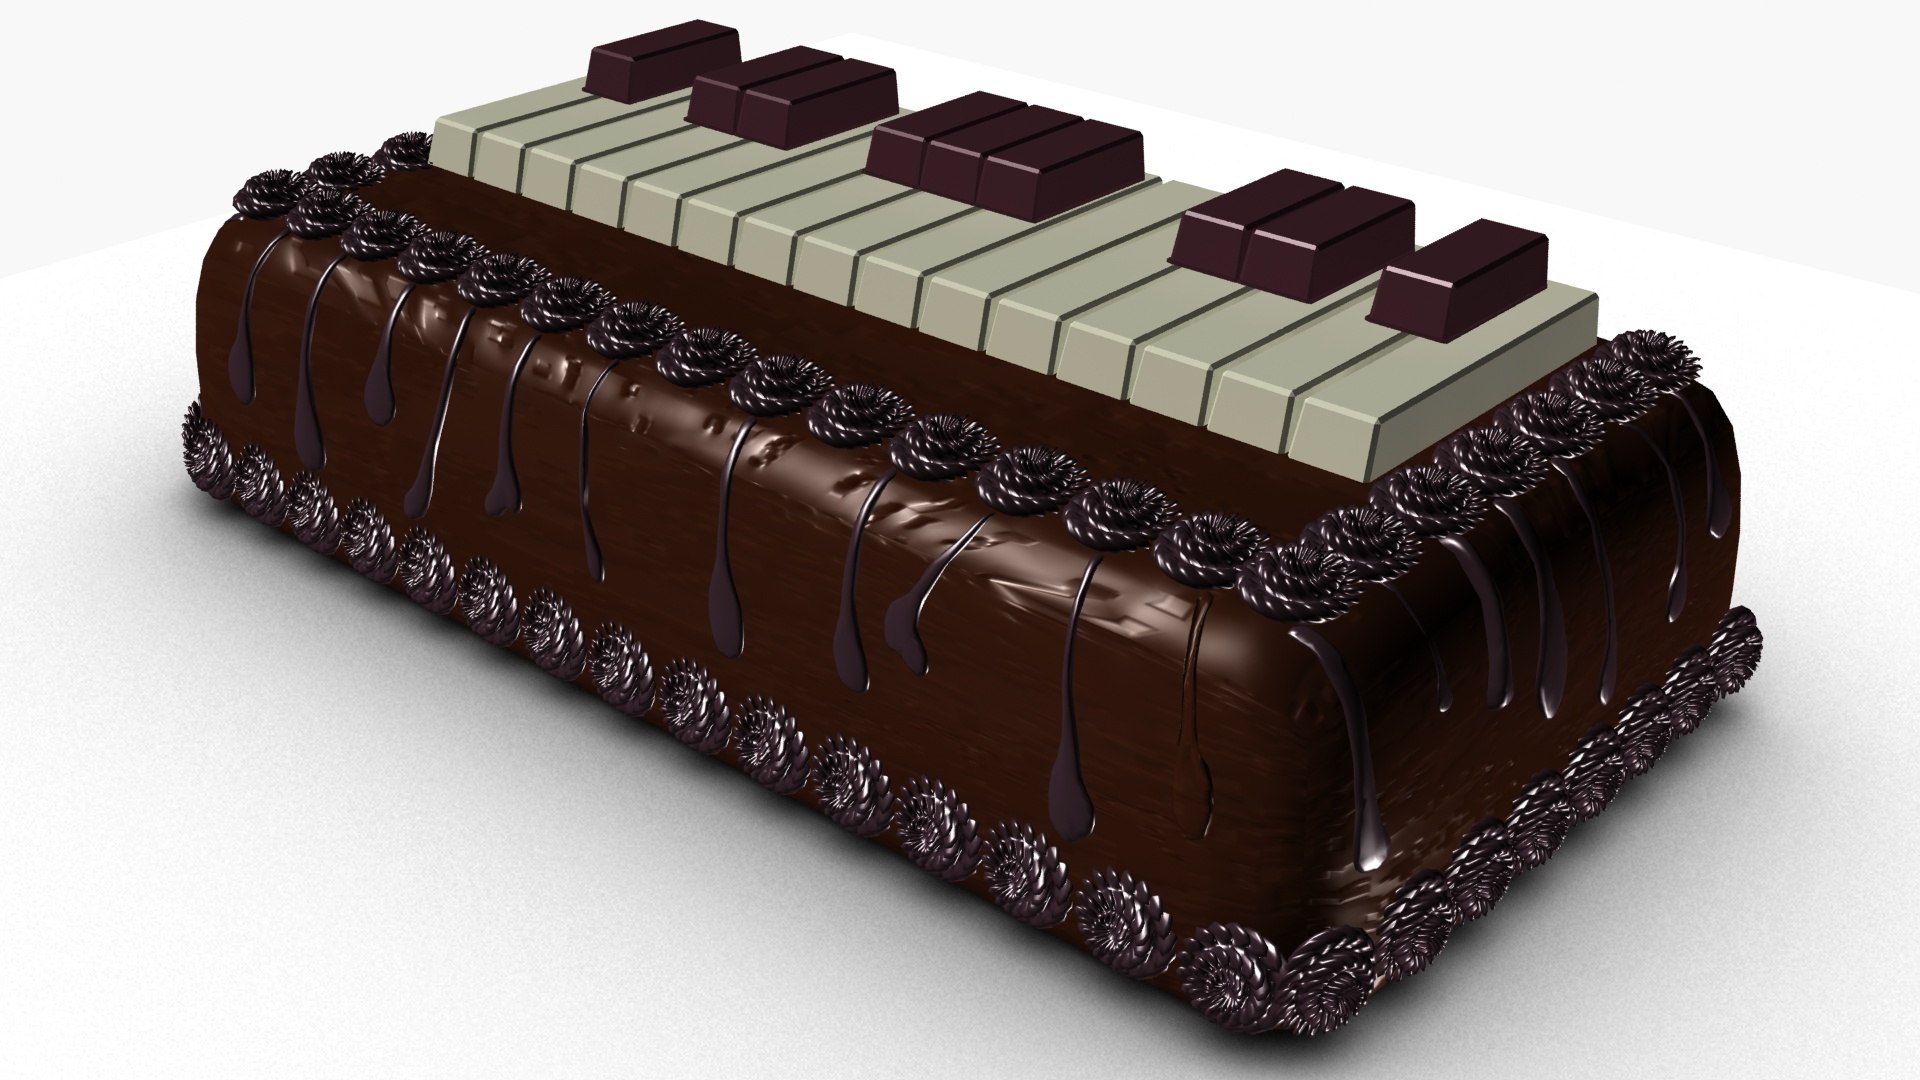 Check out my Chocolate Piano Cake - Chef Darren McGrady | The Royal Chef